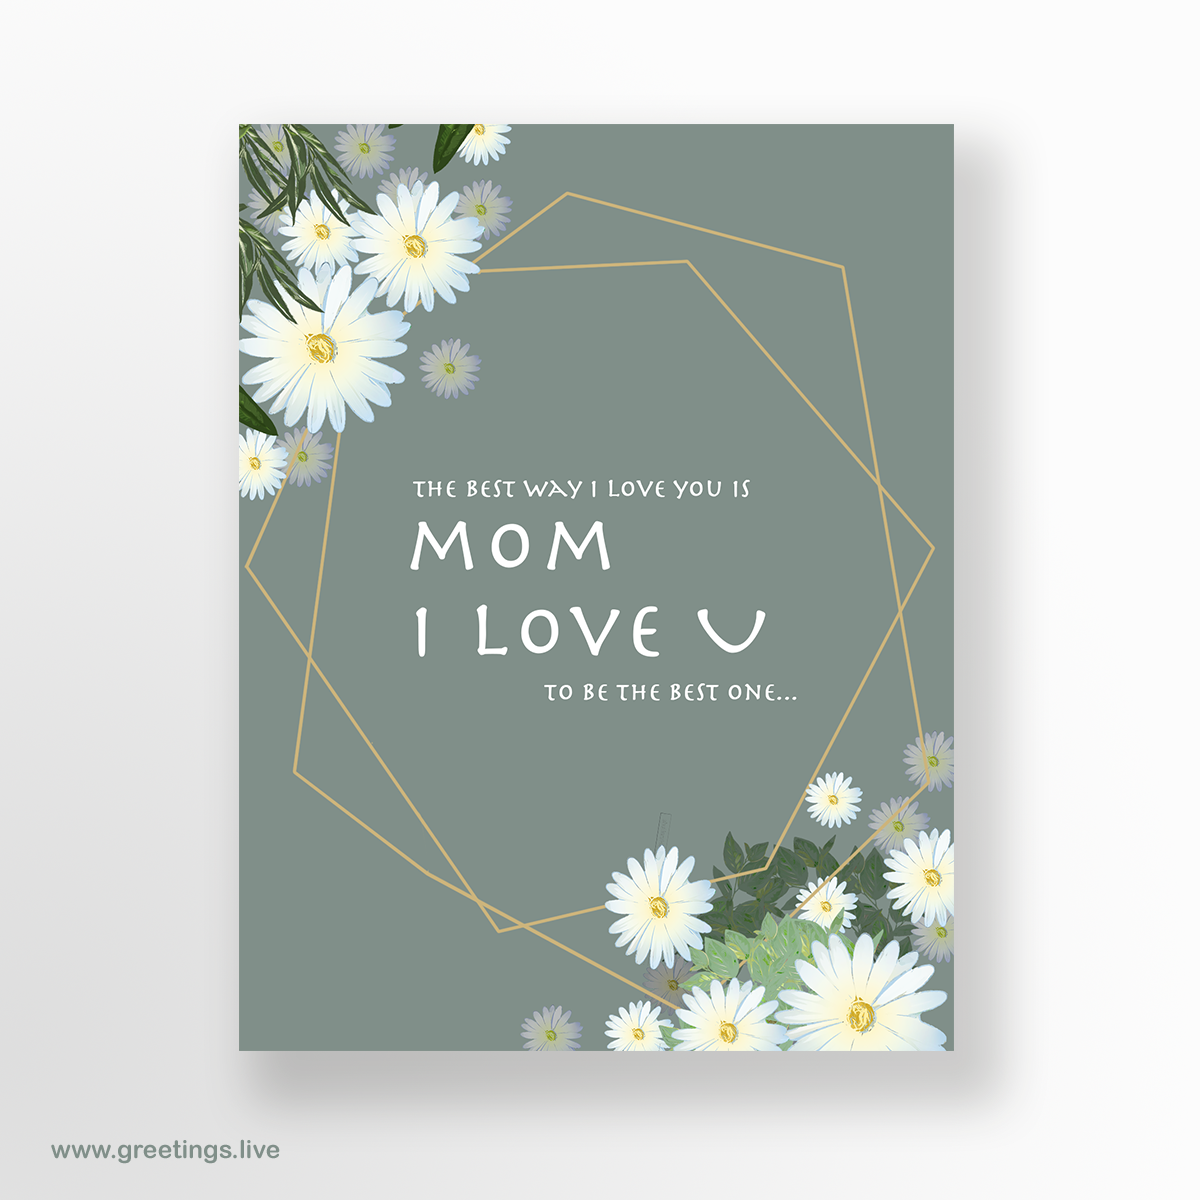 Greetings Live Free Daily Greetings Pictures Festival Gif Images Mom I Love You Mothers Day Greetings Card